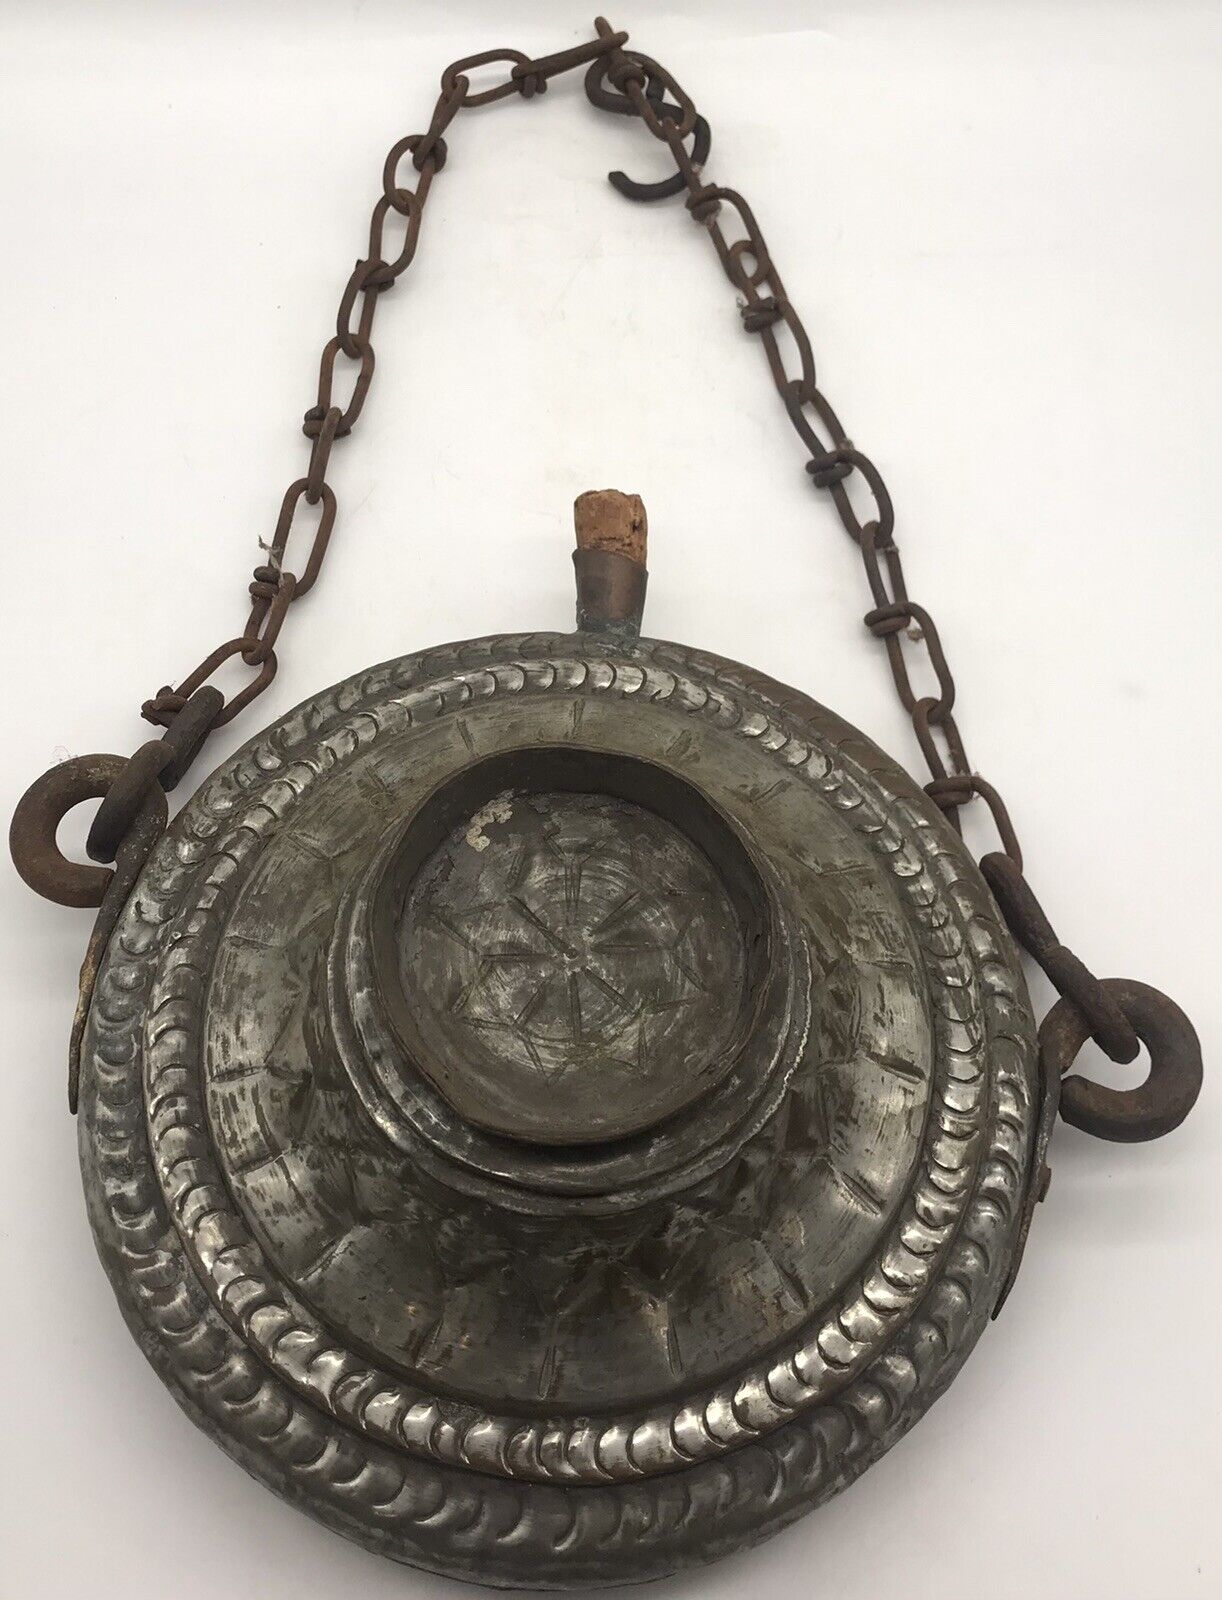 ANTIQUE 1800s ENGLISH METAL WATER BOTTLE/CANTEEN